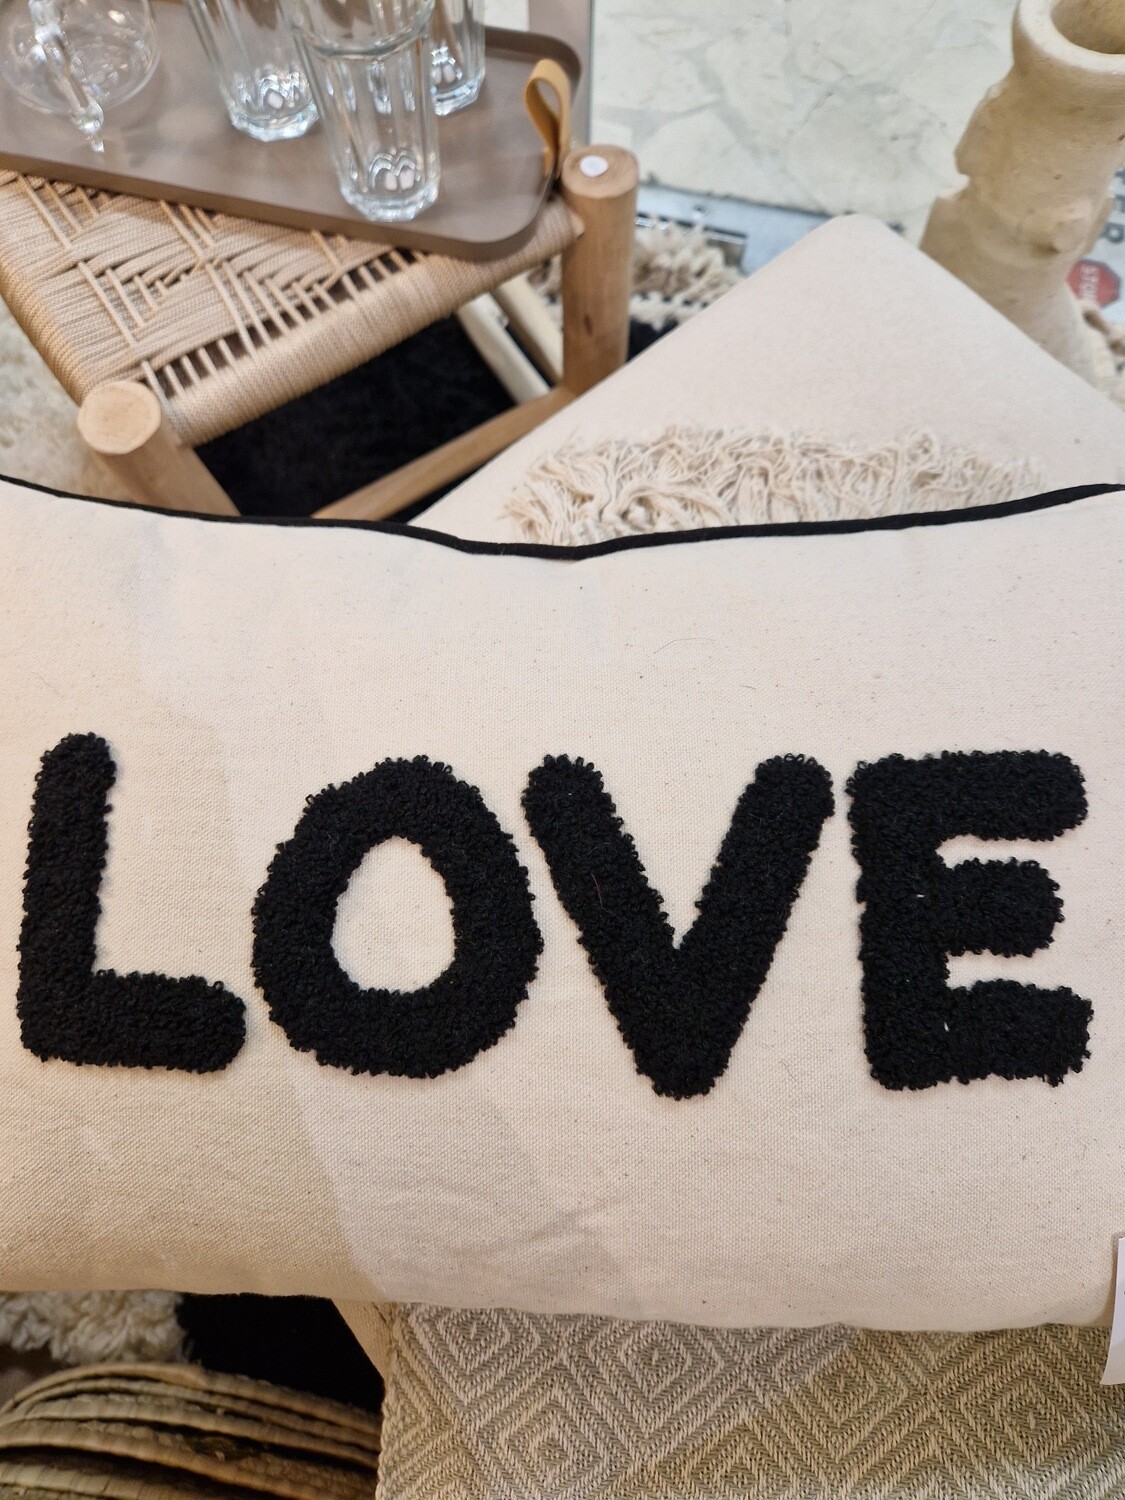 Coussin LOVE